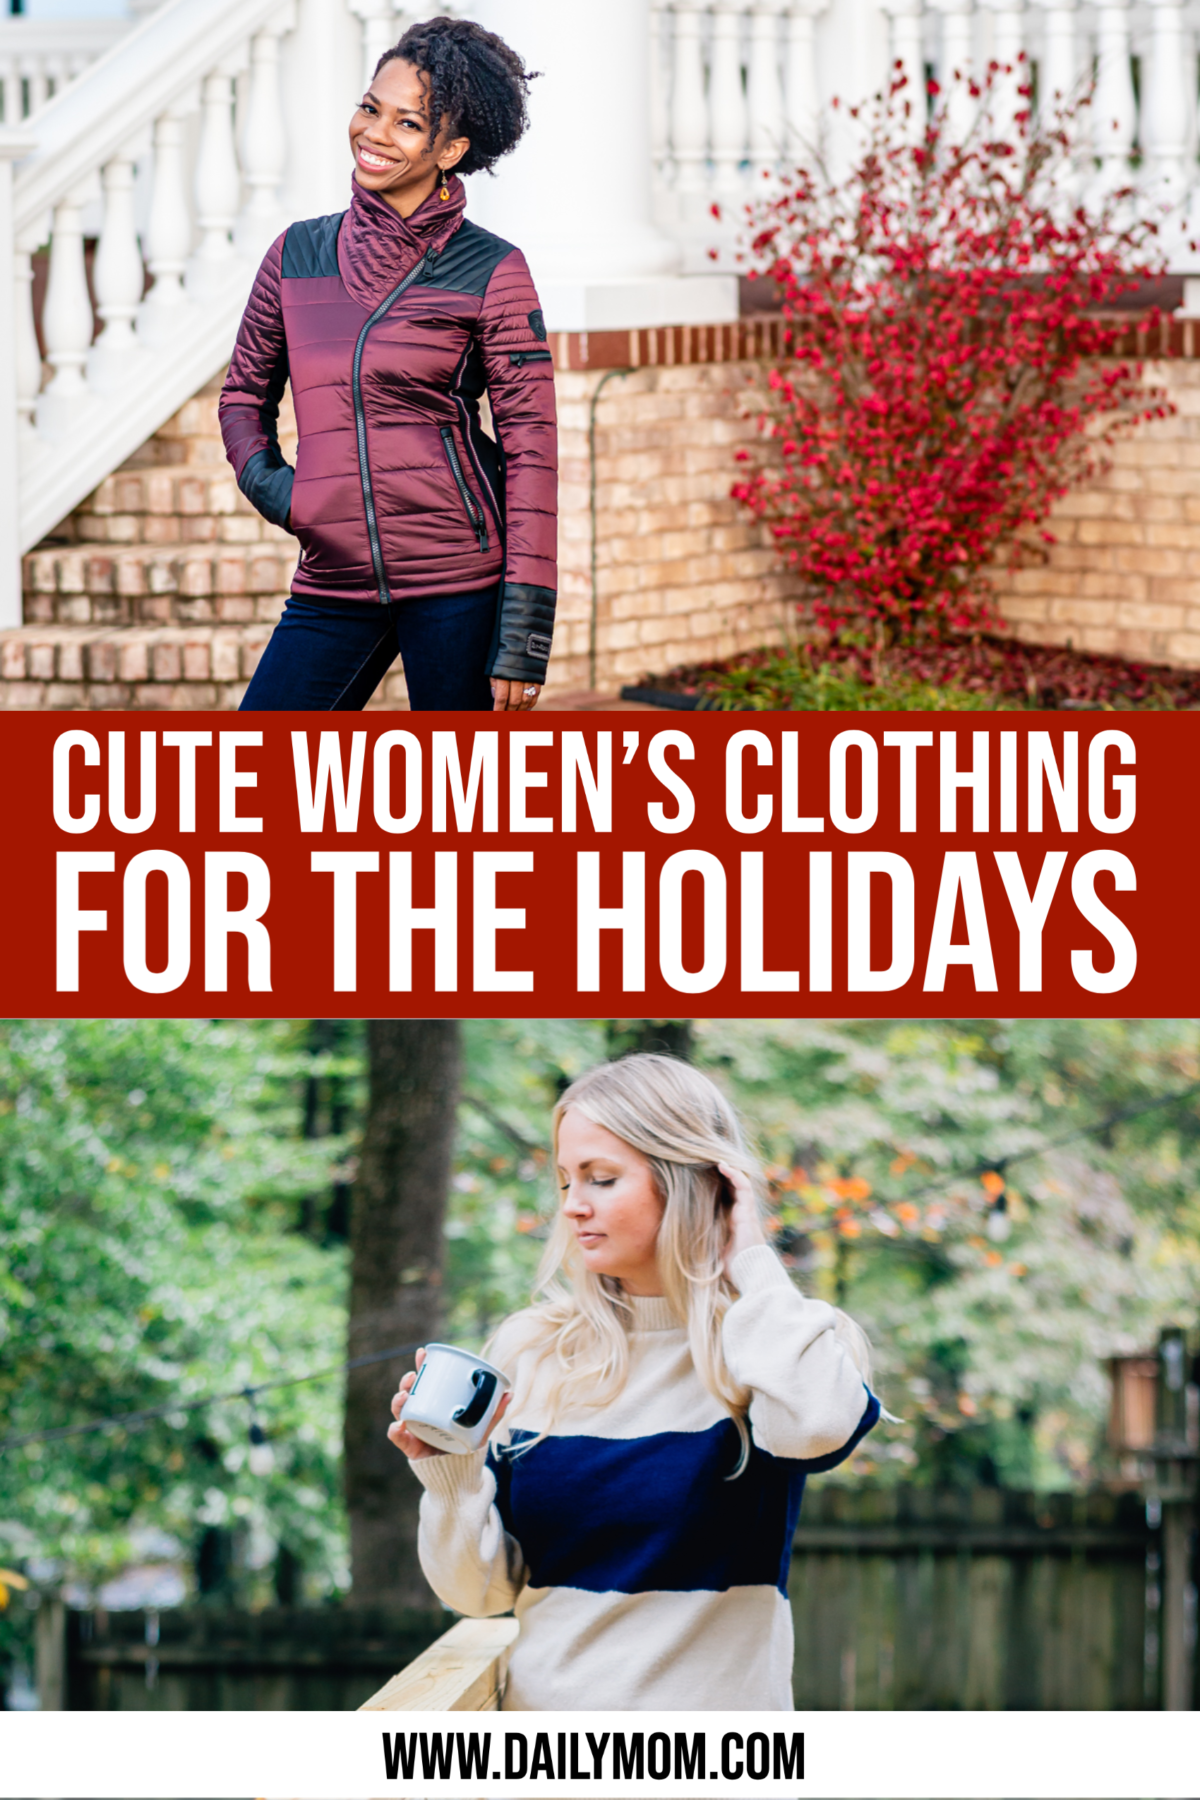 22 Cute Women’S Clothing Styles For The Holiday Season {2020}